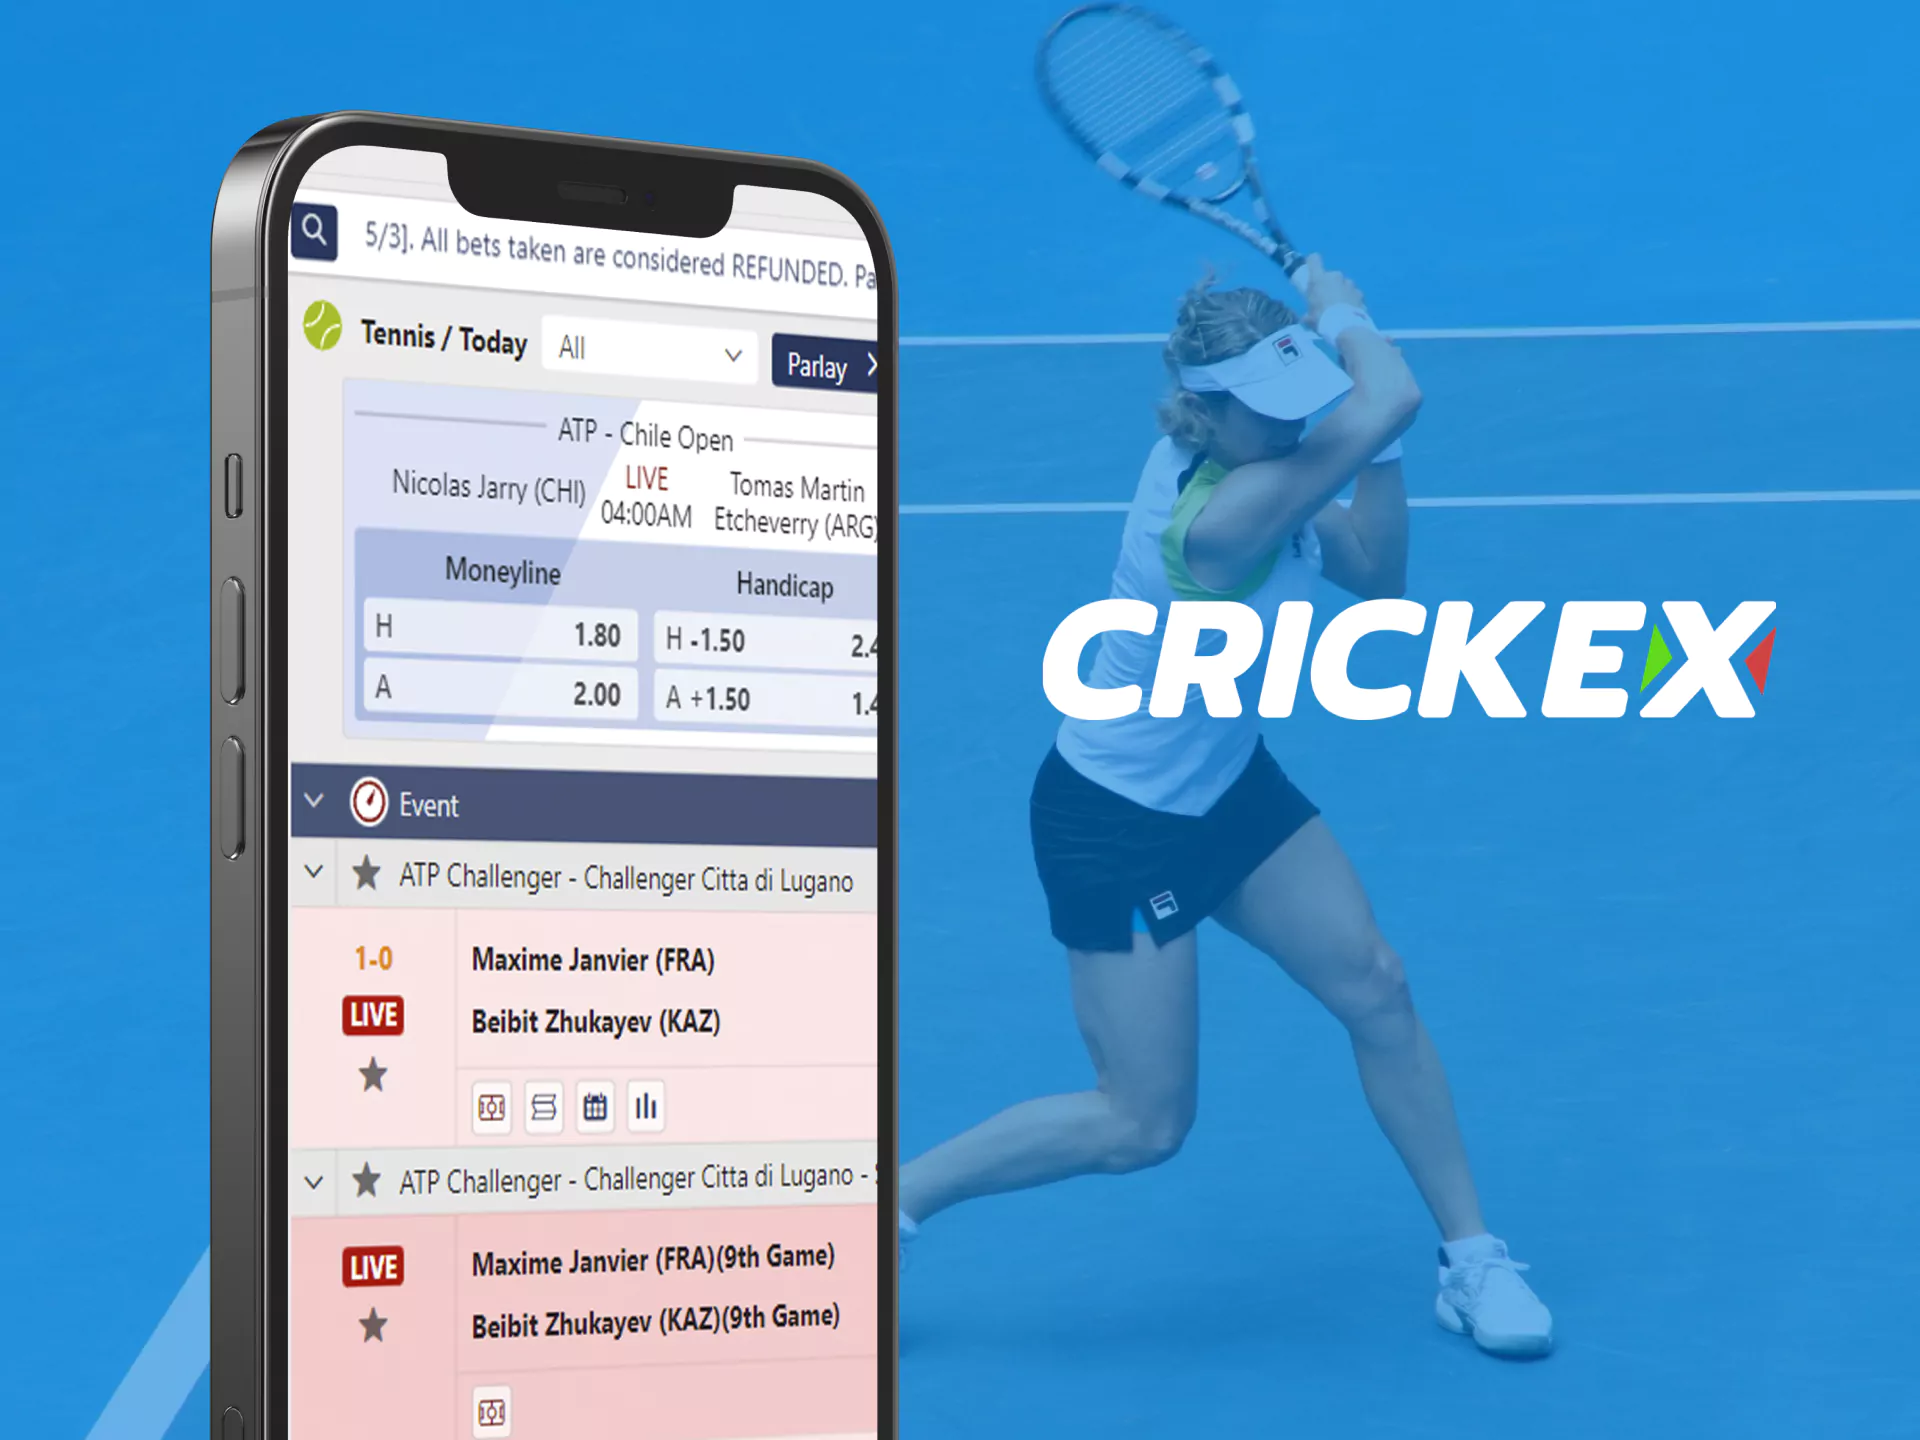 For tennis betting, you can use Crickex on your phone.